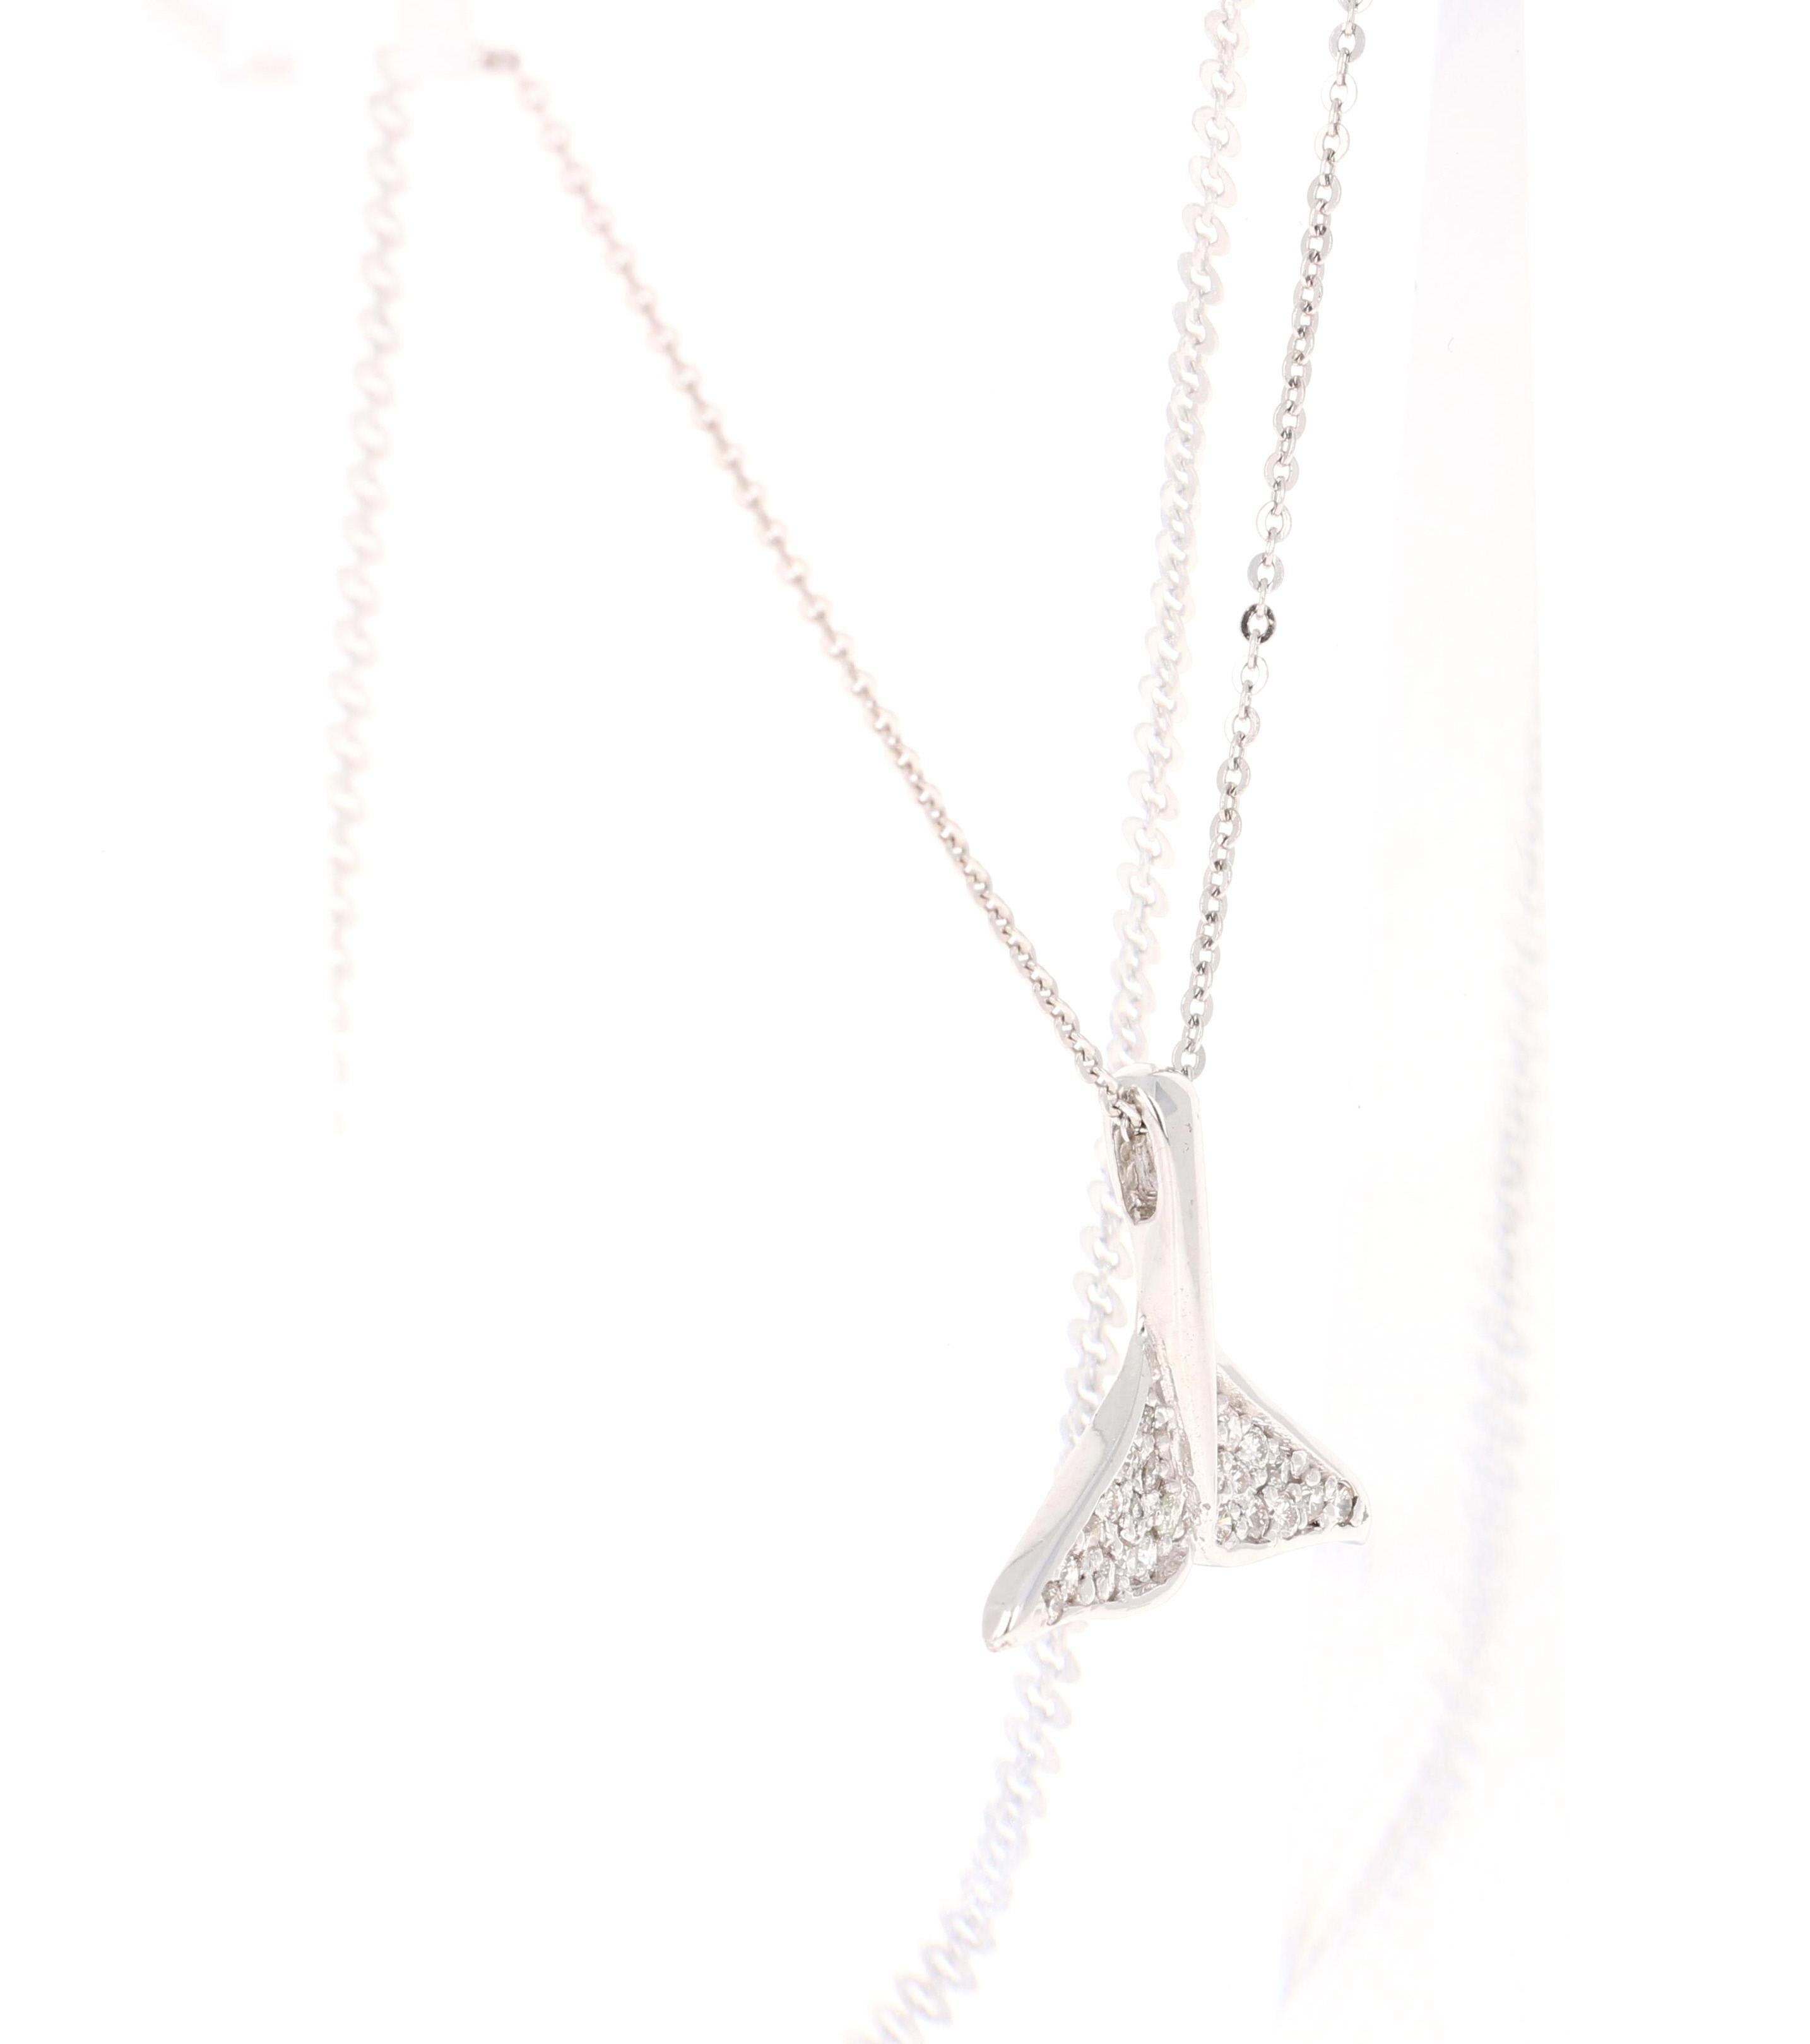 This Chain Necklace has a Whale Tail as its shape and has 23 Round Cut Diamonds that weigh 0.23 carats.  (Clarity: VS, Color: H) The total carat weight of the Pendant is 0.23 Carats.

It is beautifully curated in 14 Karat White Gold and weighs